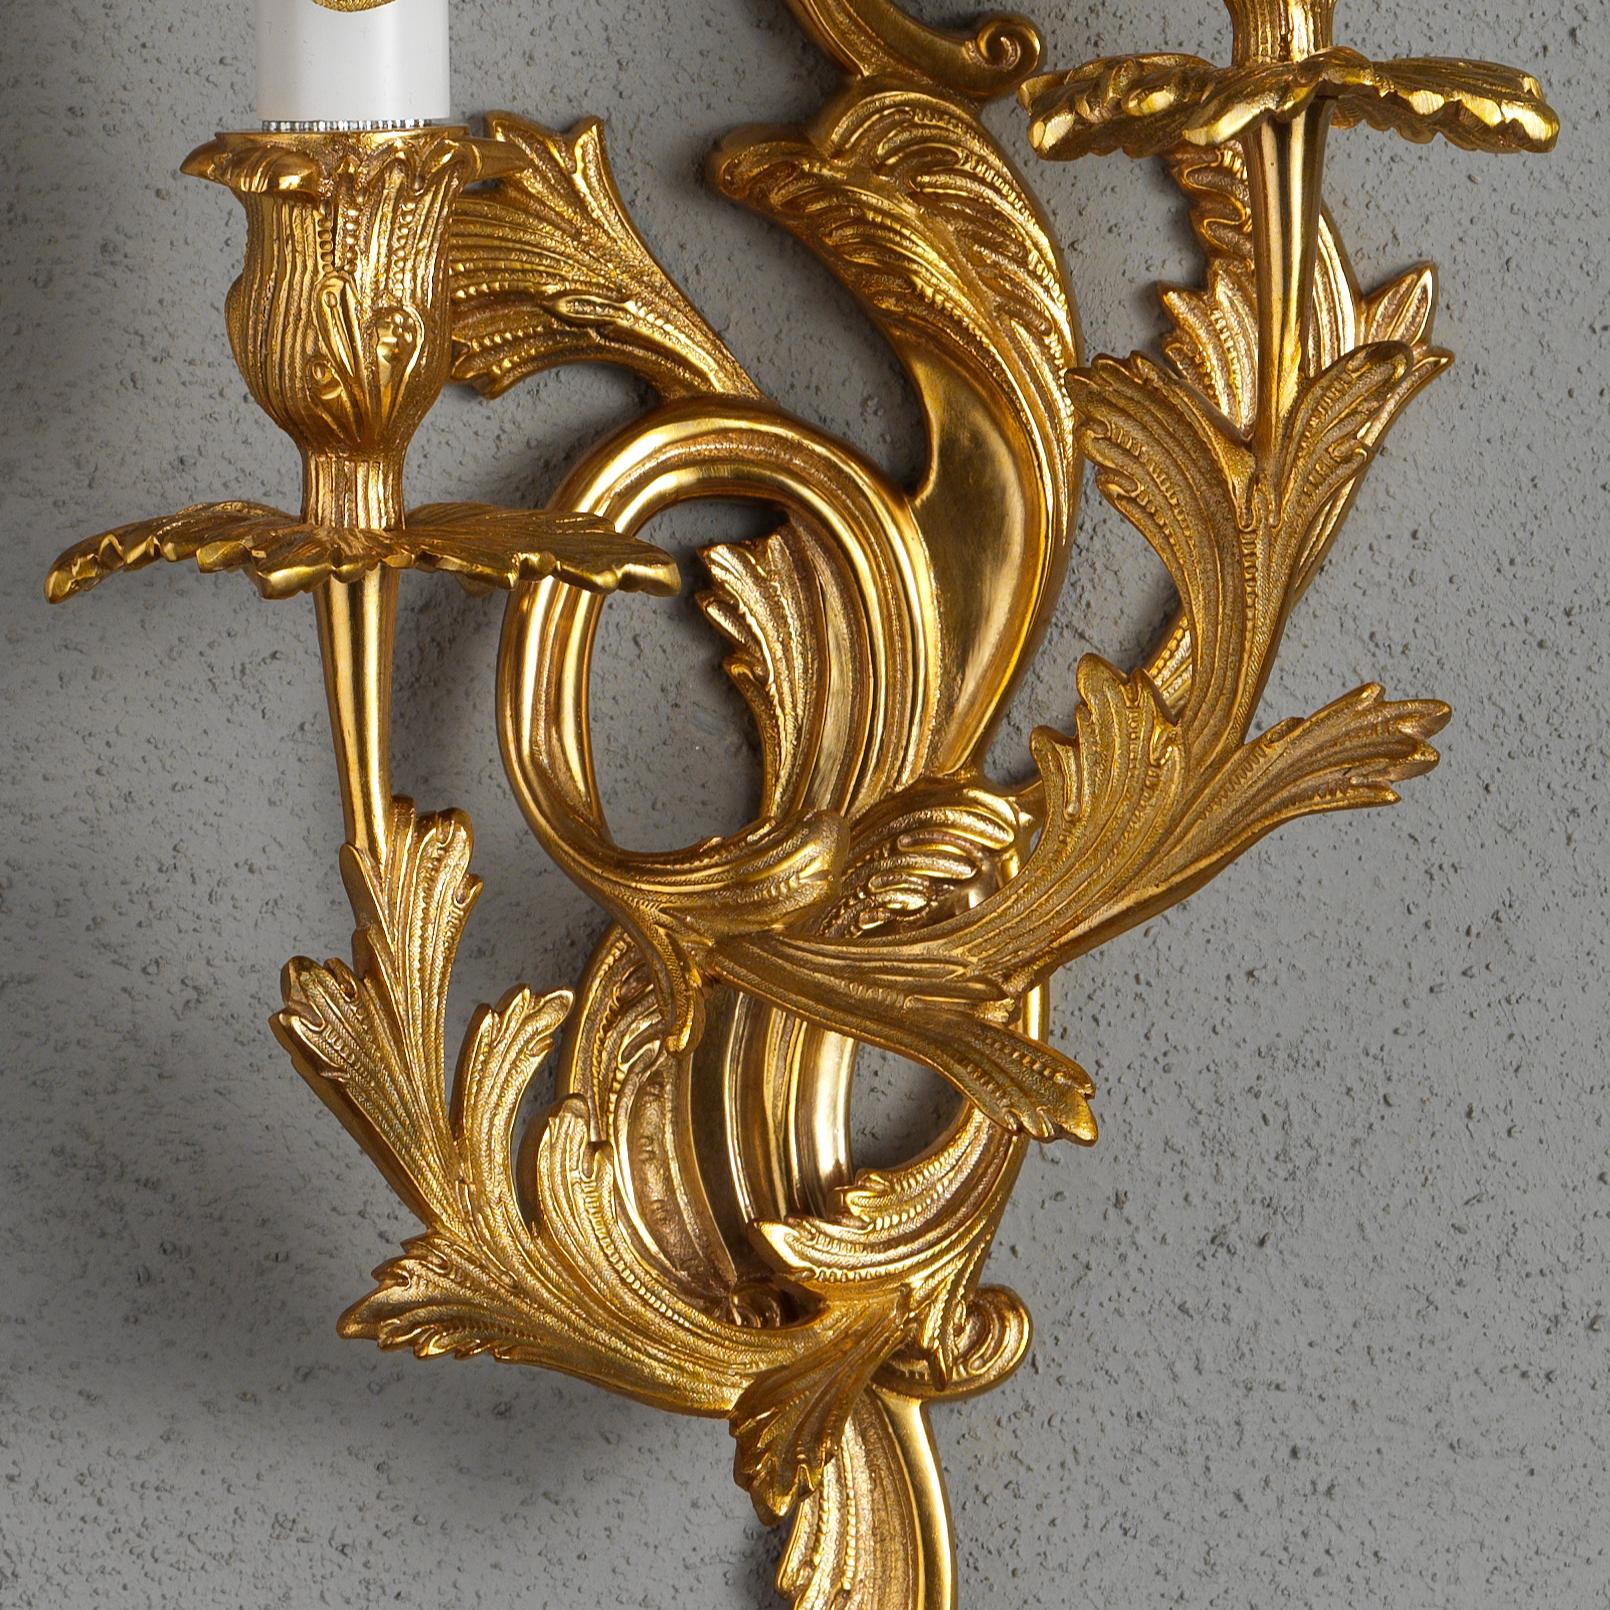 A fine set of French Louis XV style gilt bronze sconces By Gherardo Degli Albizzi Beautifully cast in the traditional manner with all the sumptuous movement of the Rococo period, having two arms issuing from the plate and adorned with acanthus